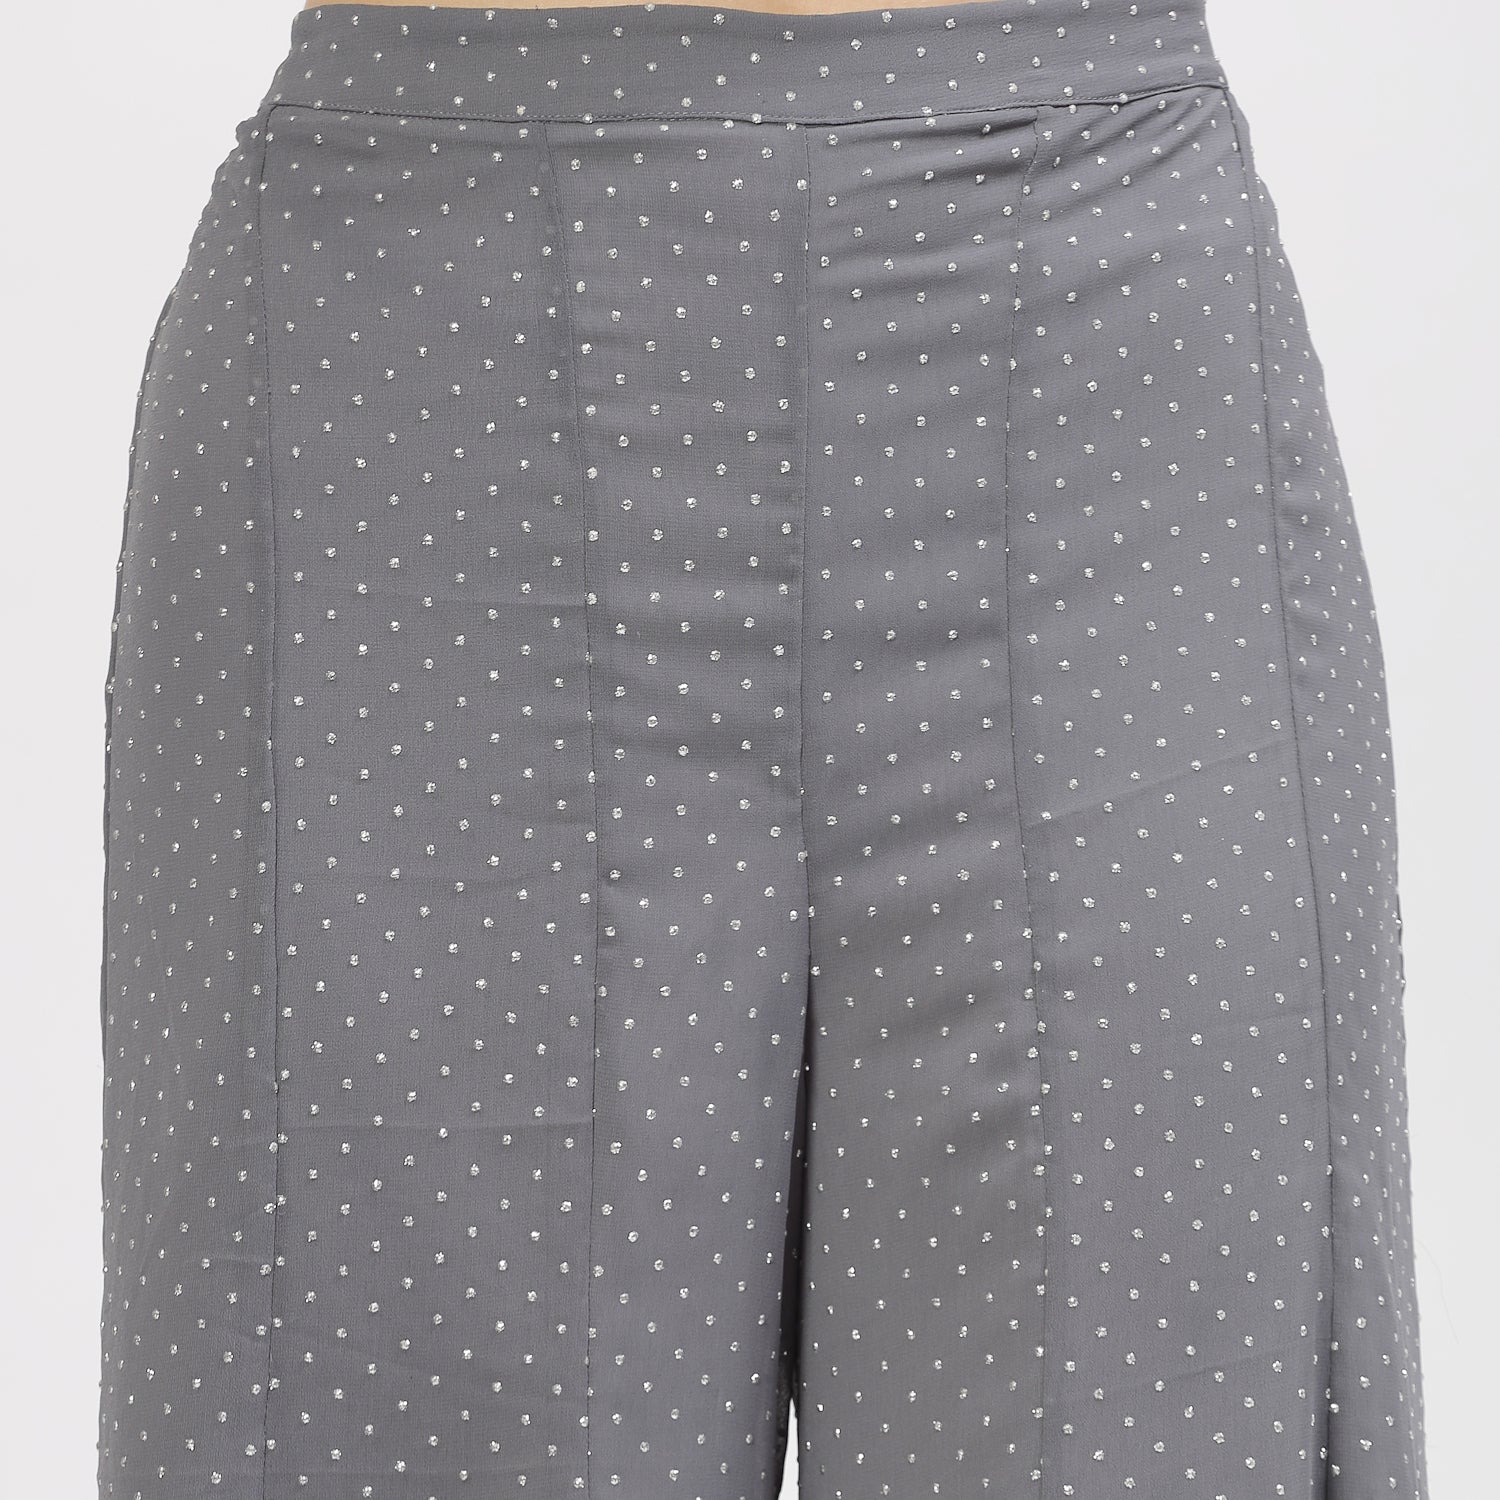 Grey Georgette Asymmetrical Plazzo with Silver Dots